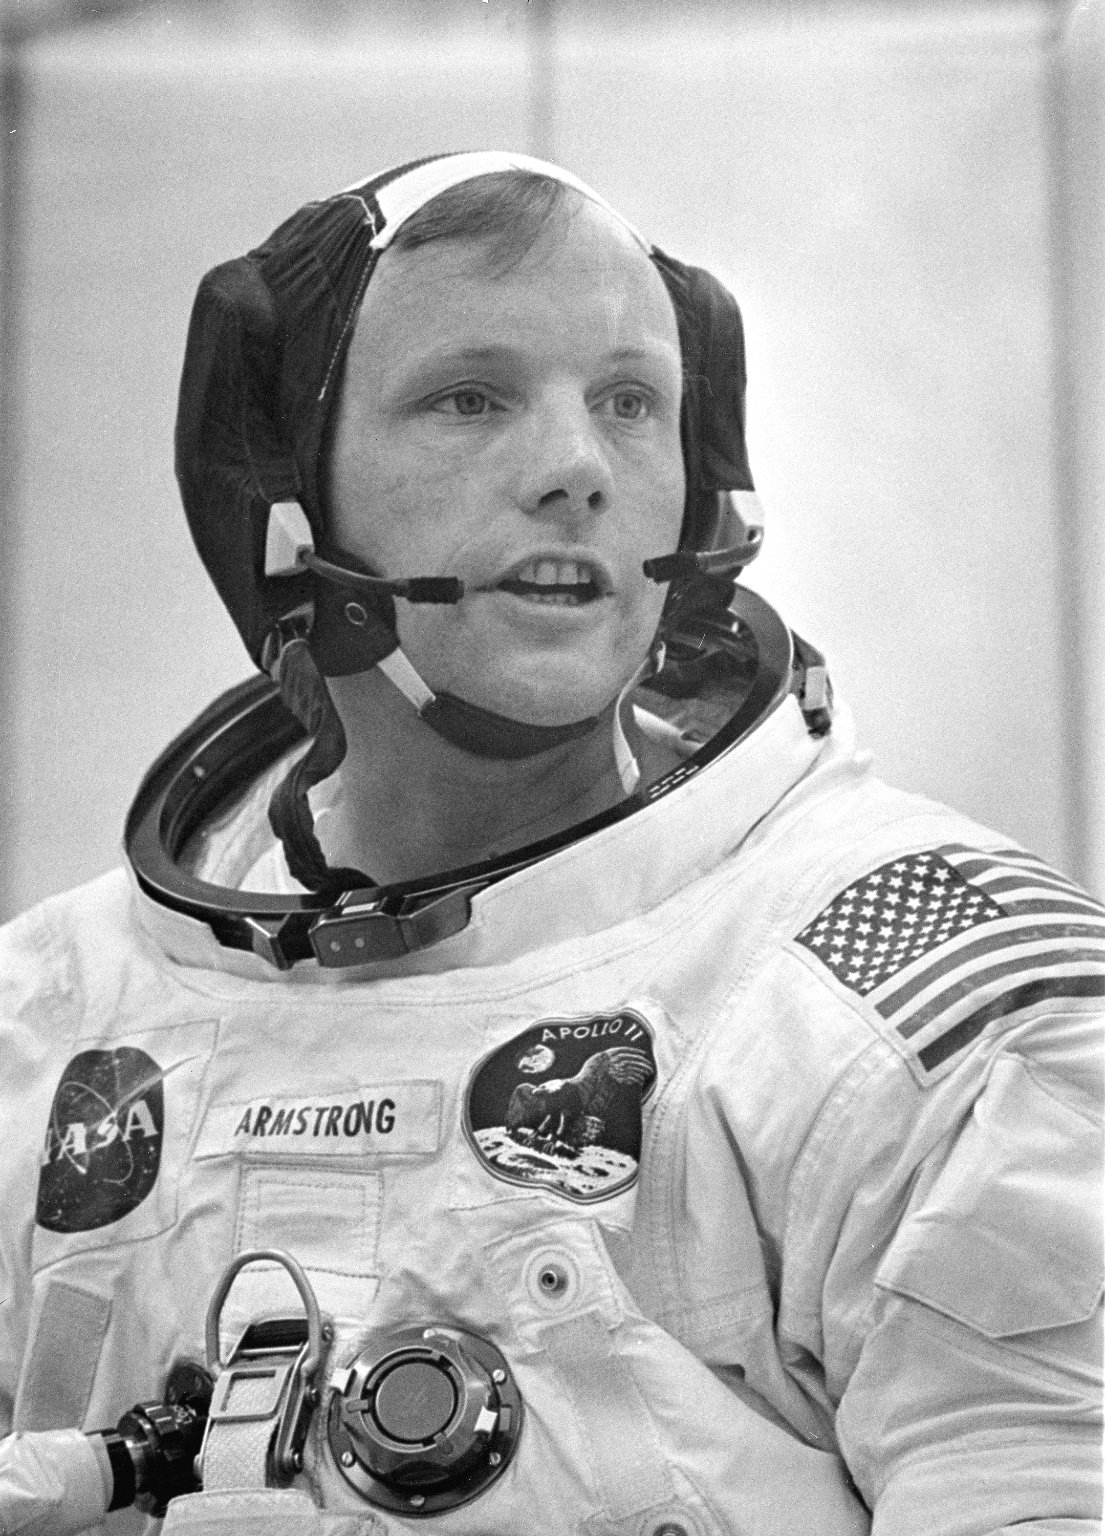 http://www.esa.int/var/esa/storage/images/esa_multimedia/images/2009/06/neil_armstrong/9672212-3-eng-GB/Neil_Armstrong.jpg